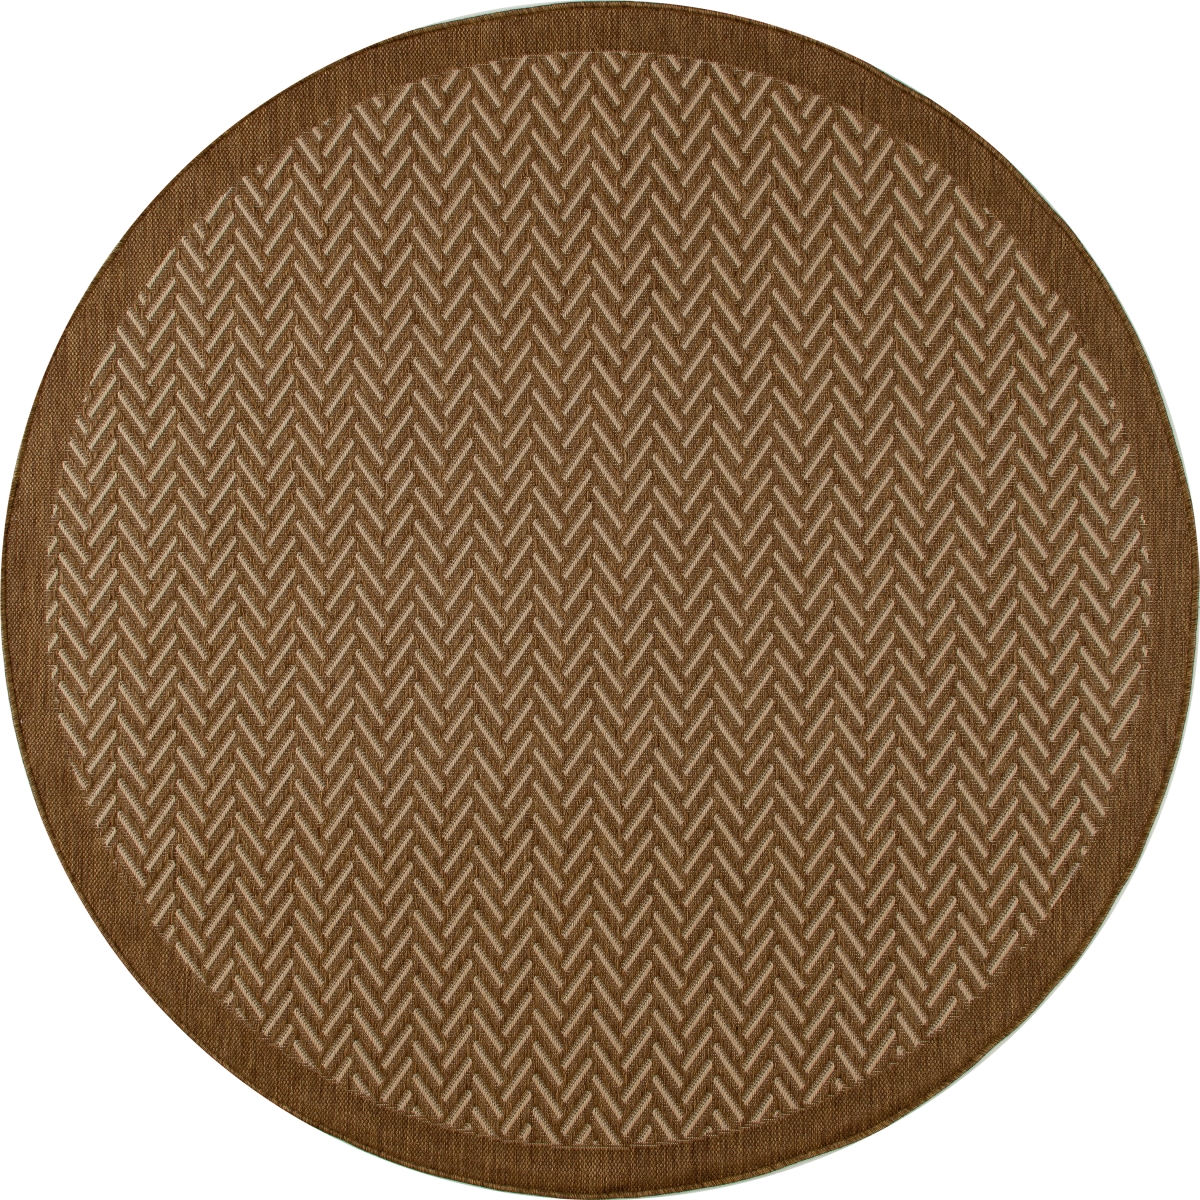 30379 8 Ft. Plymouth Collection Bayou Flat Woven Indoor & Outdoor Round Area Rug, Brown